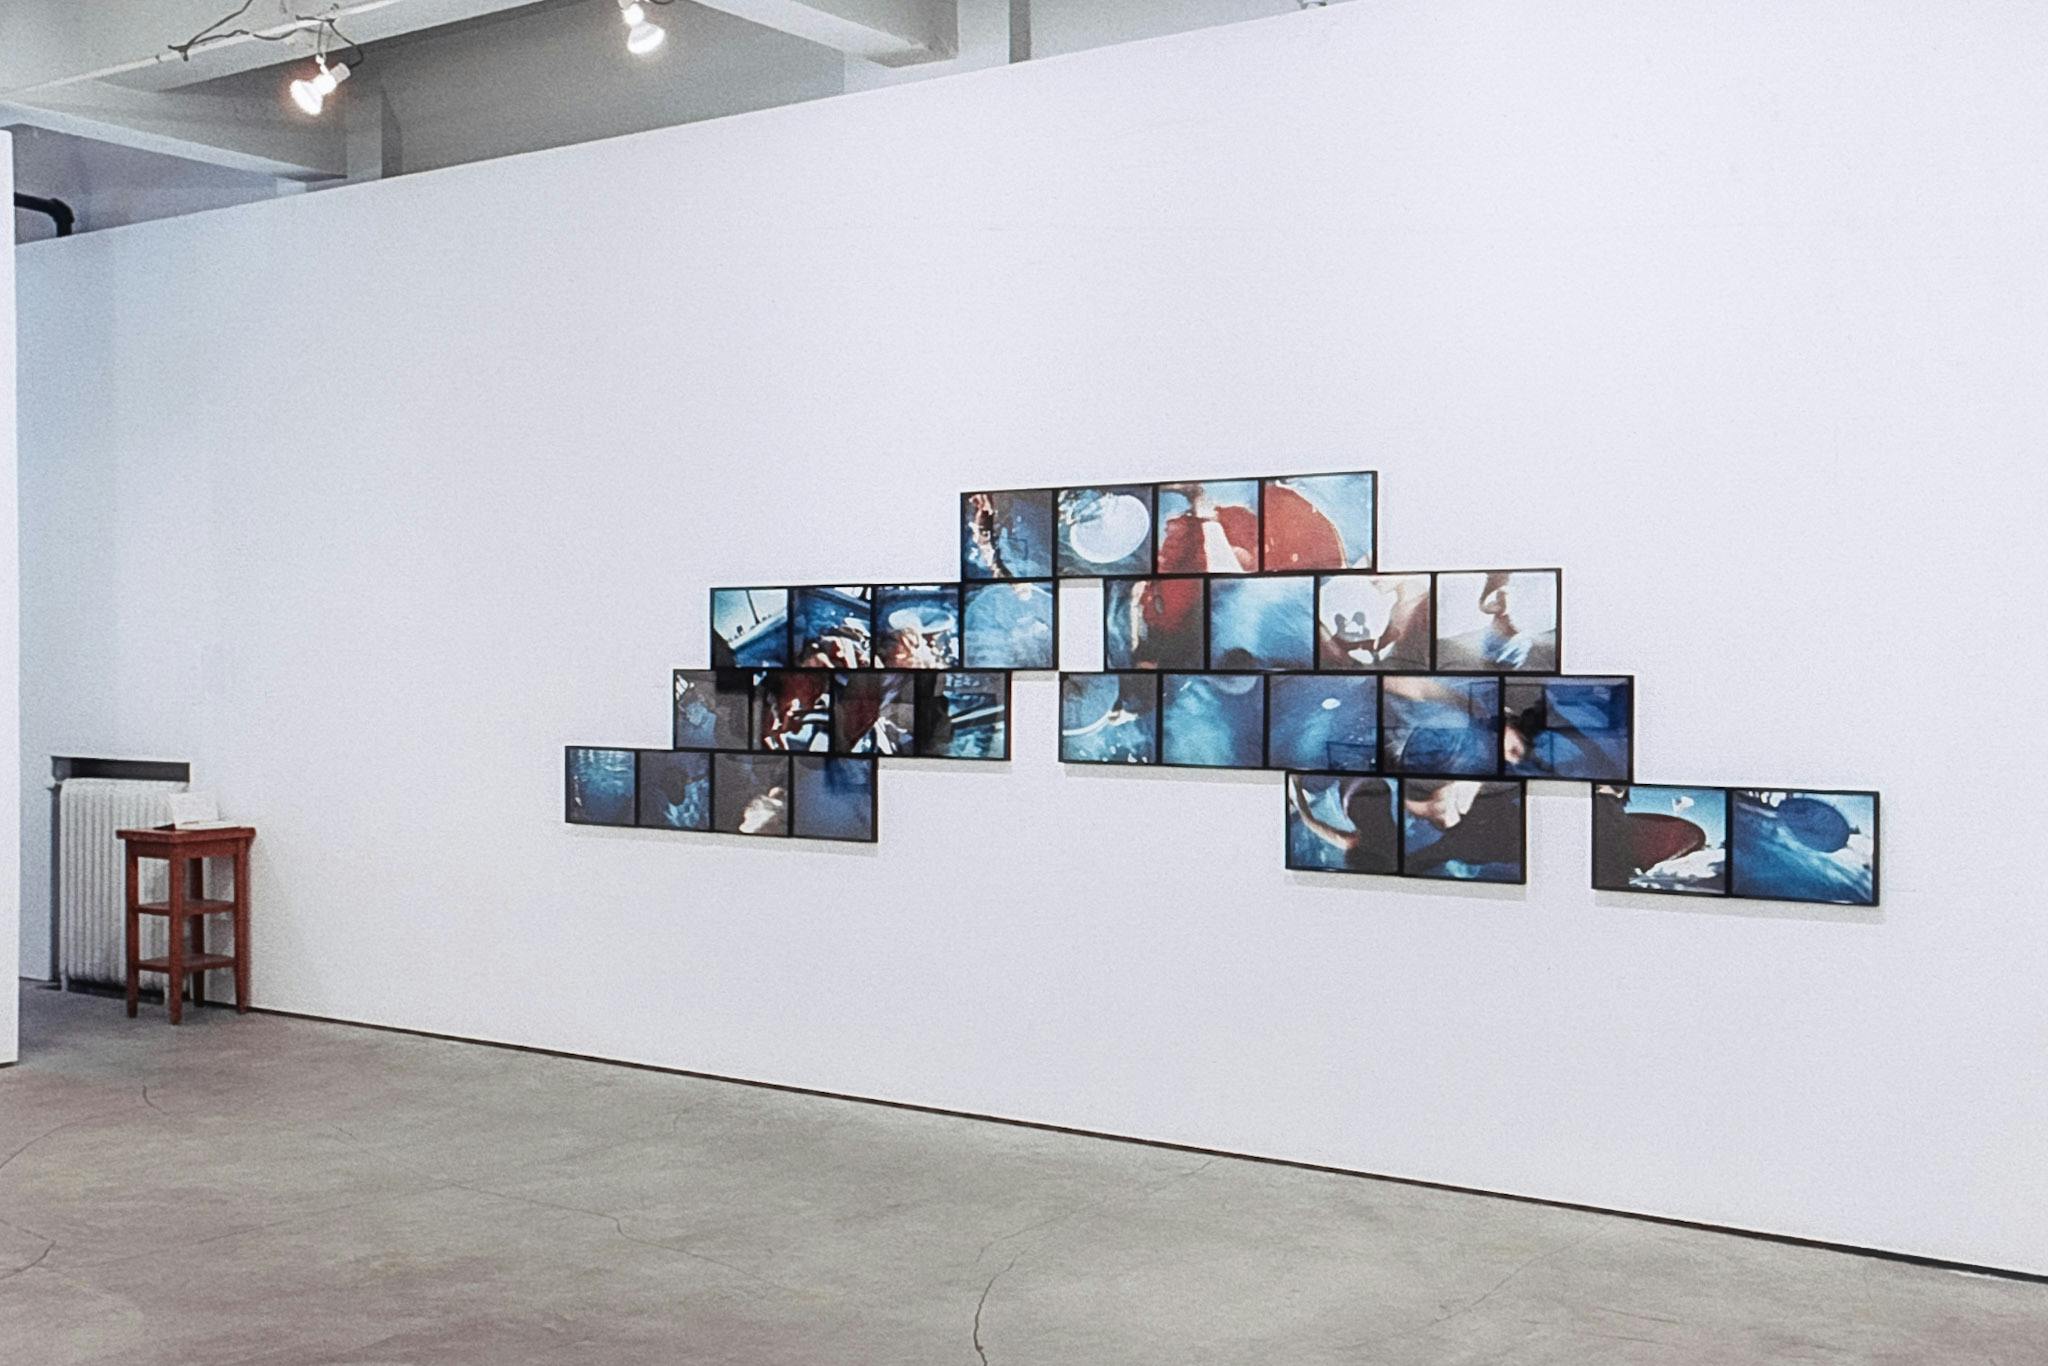 On the wall of a gallery, there are 29 cibachrome photos arranged in a pyramid-like way. They show small glimpses of people and water.  In the corner of the photo, there is a small wooden side table.